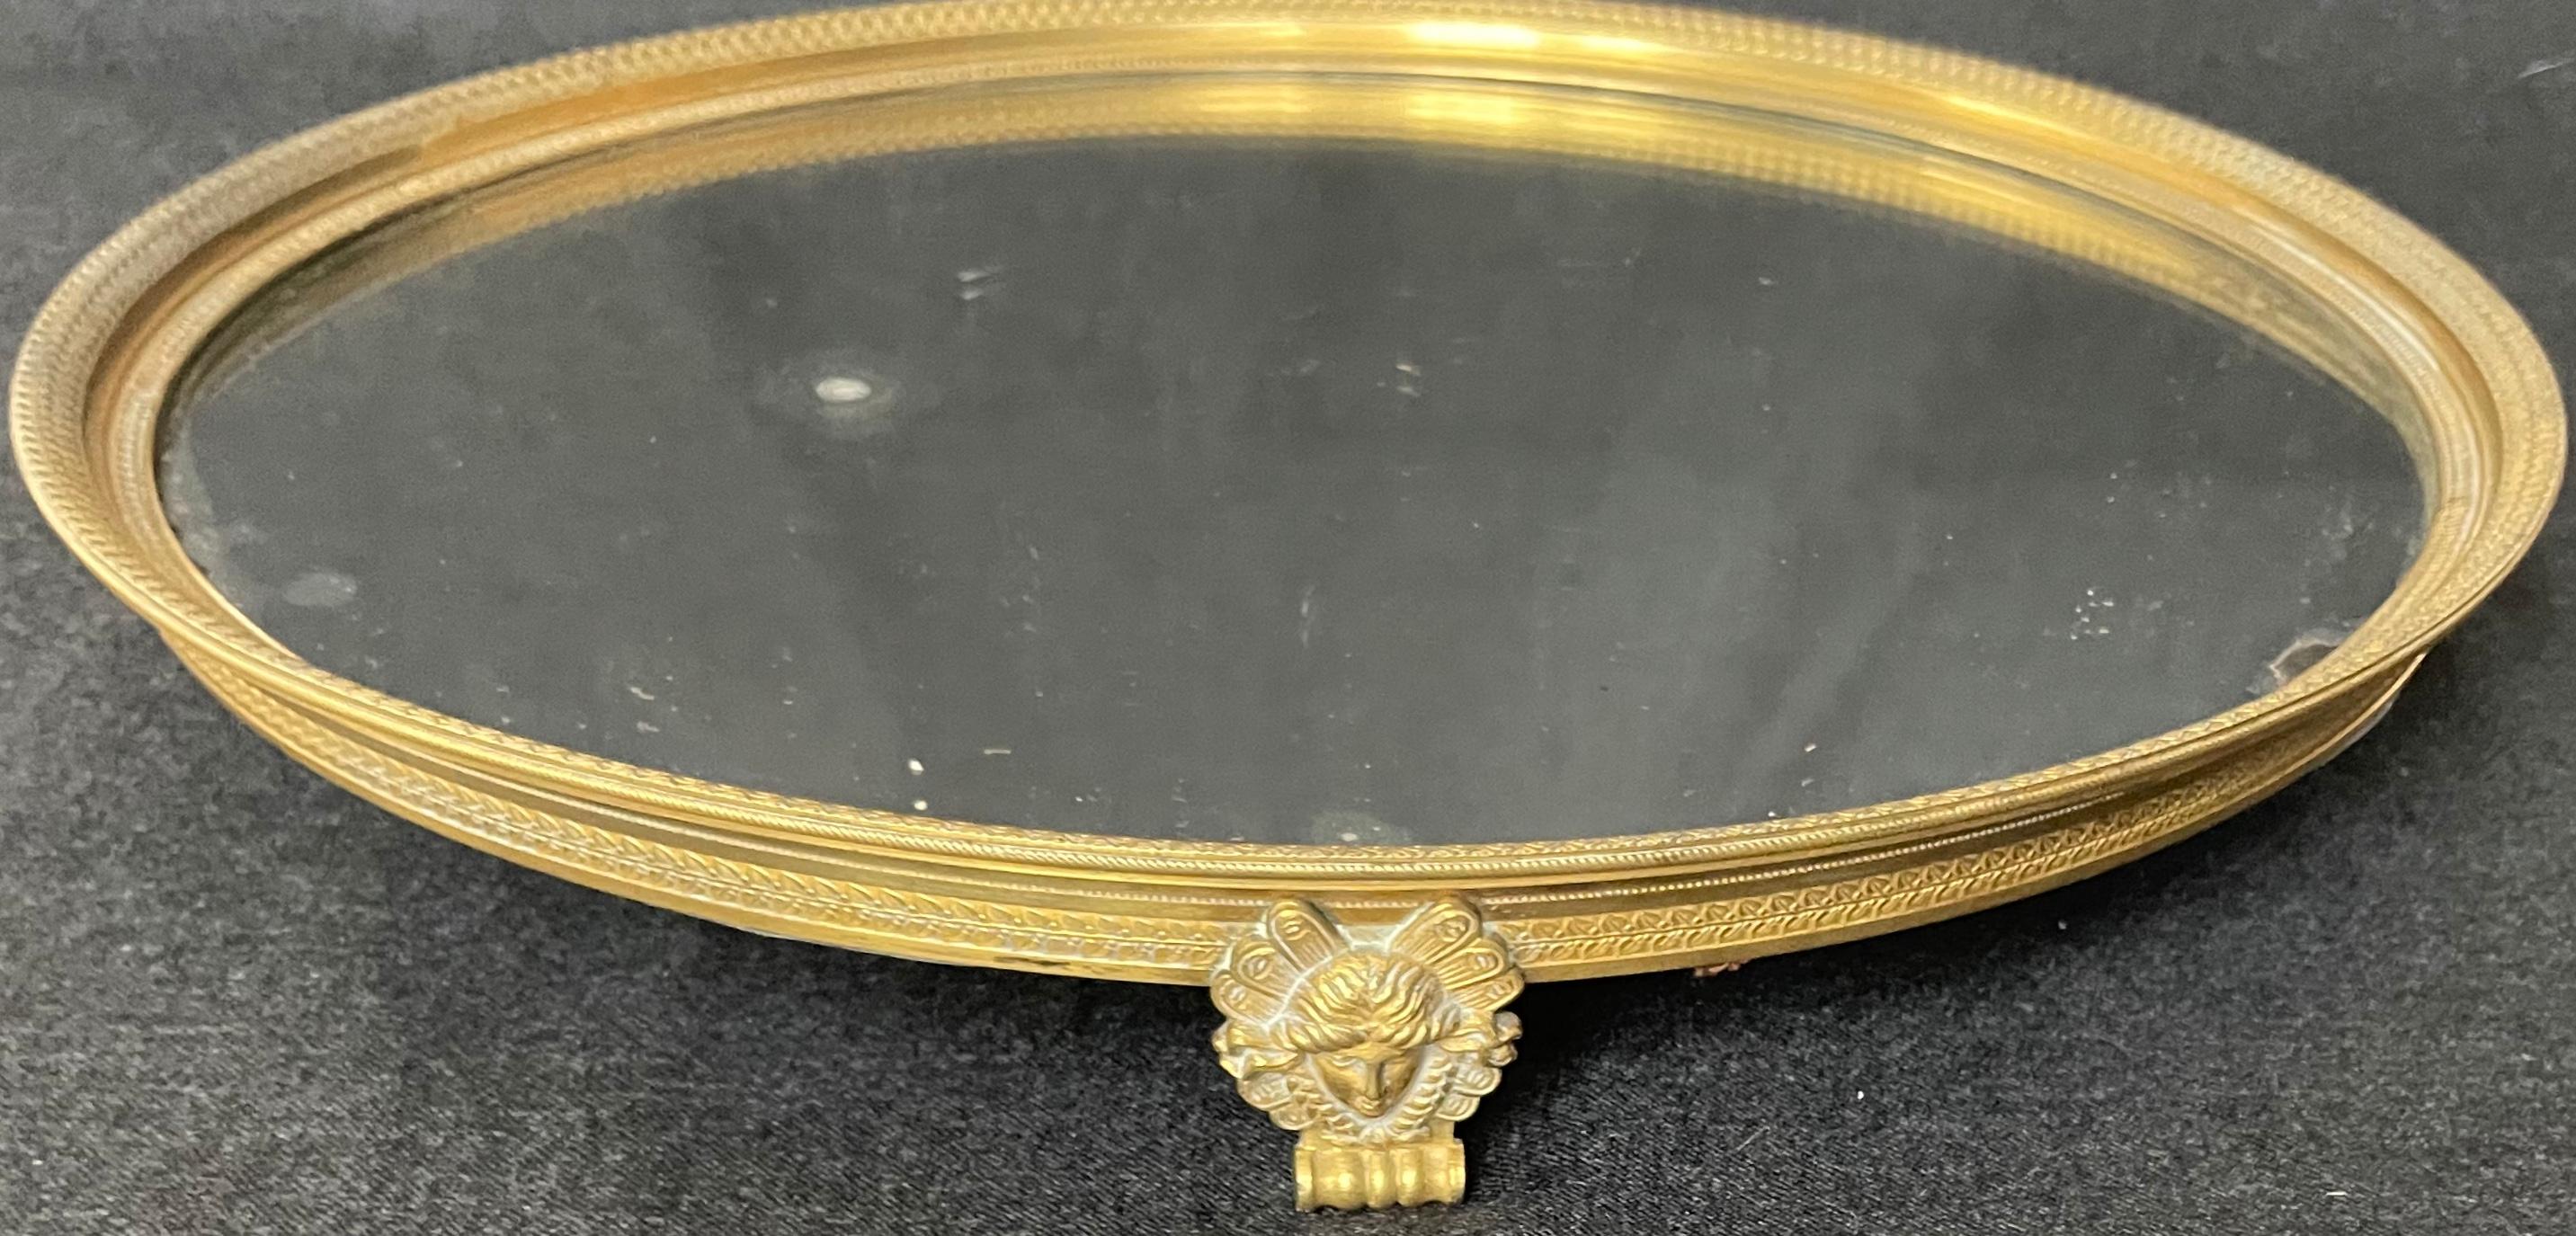 19th Century French Neoclassical Gilt Ormolu Mirrored Centerpiece For Sale